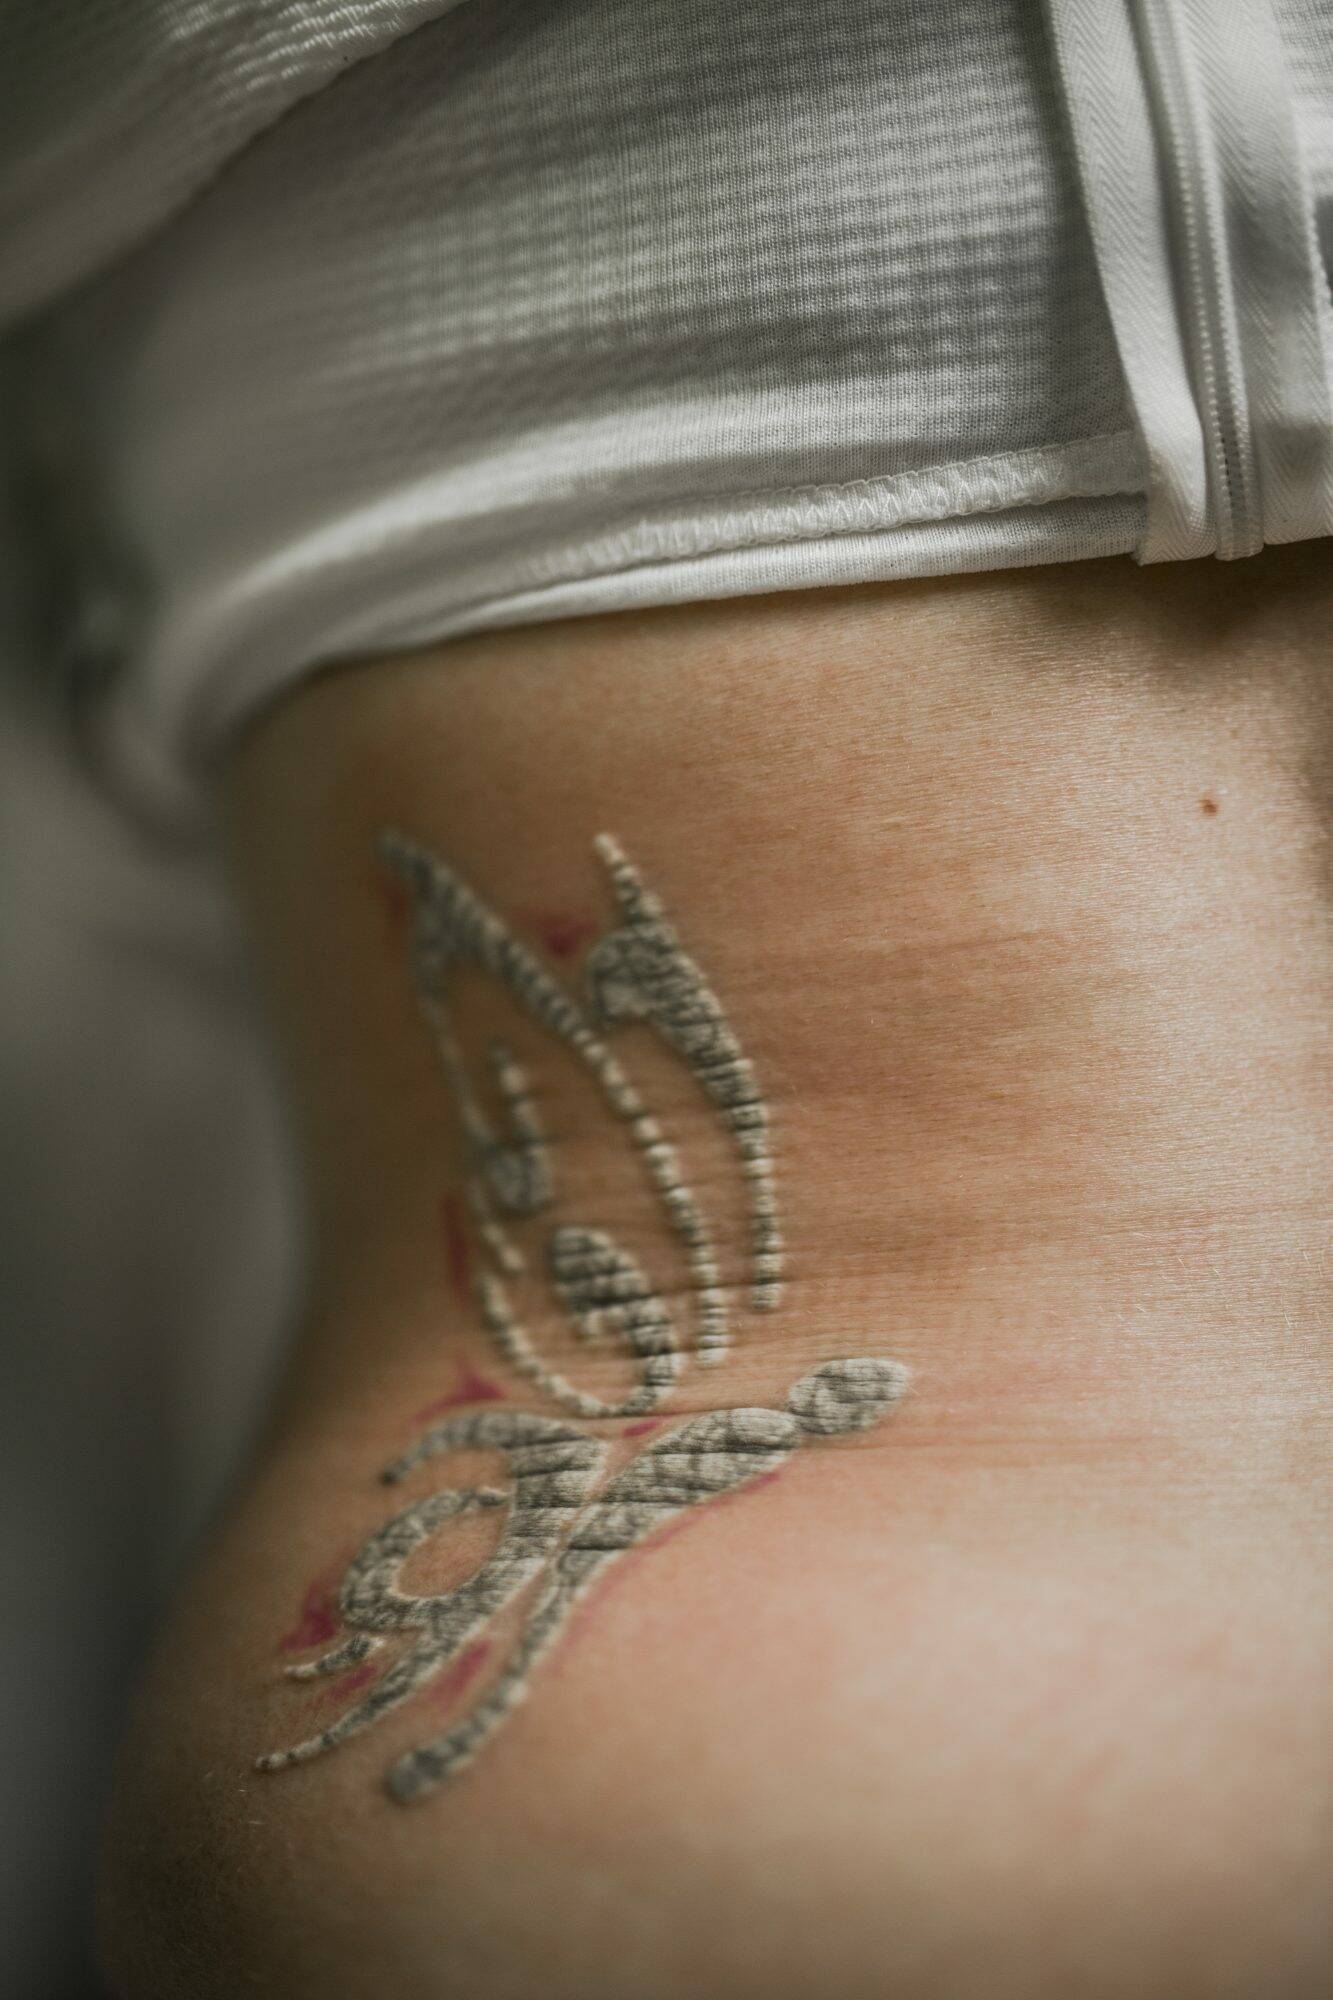 Tattoo Removal on Up to 10cm x 10cm Area at ReNew Skin  ReNew Skin   Groupon